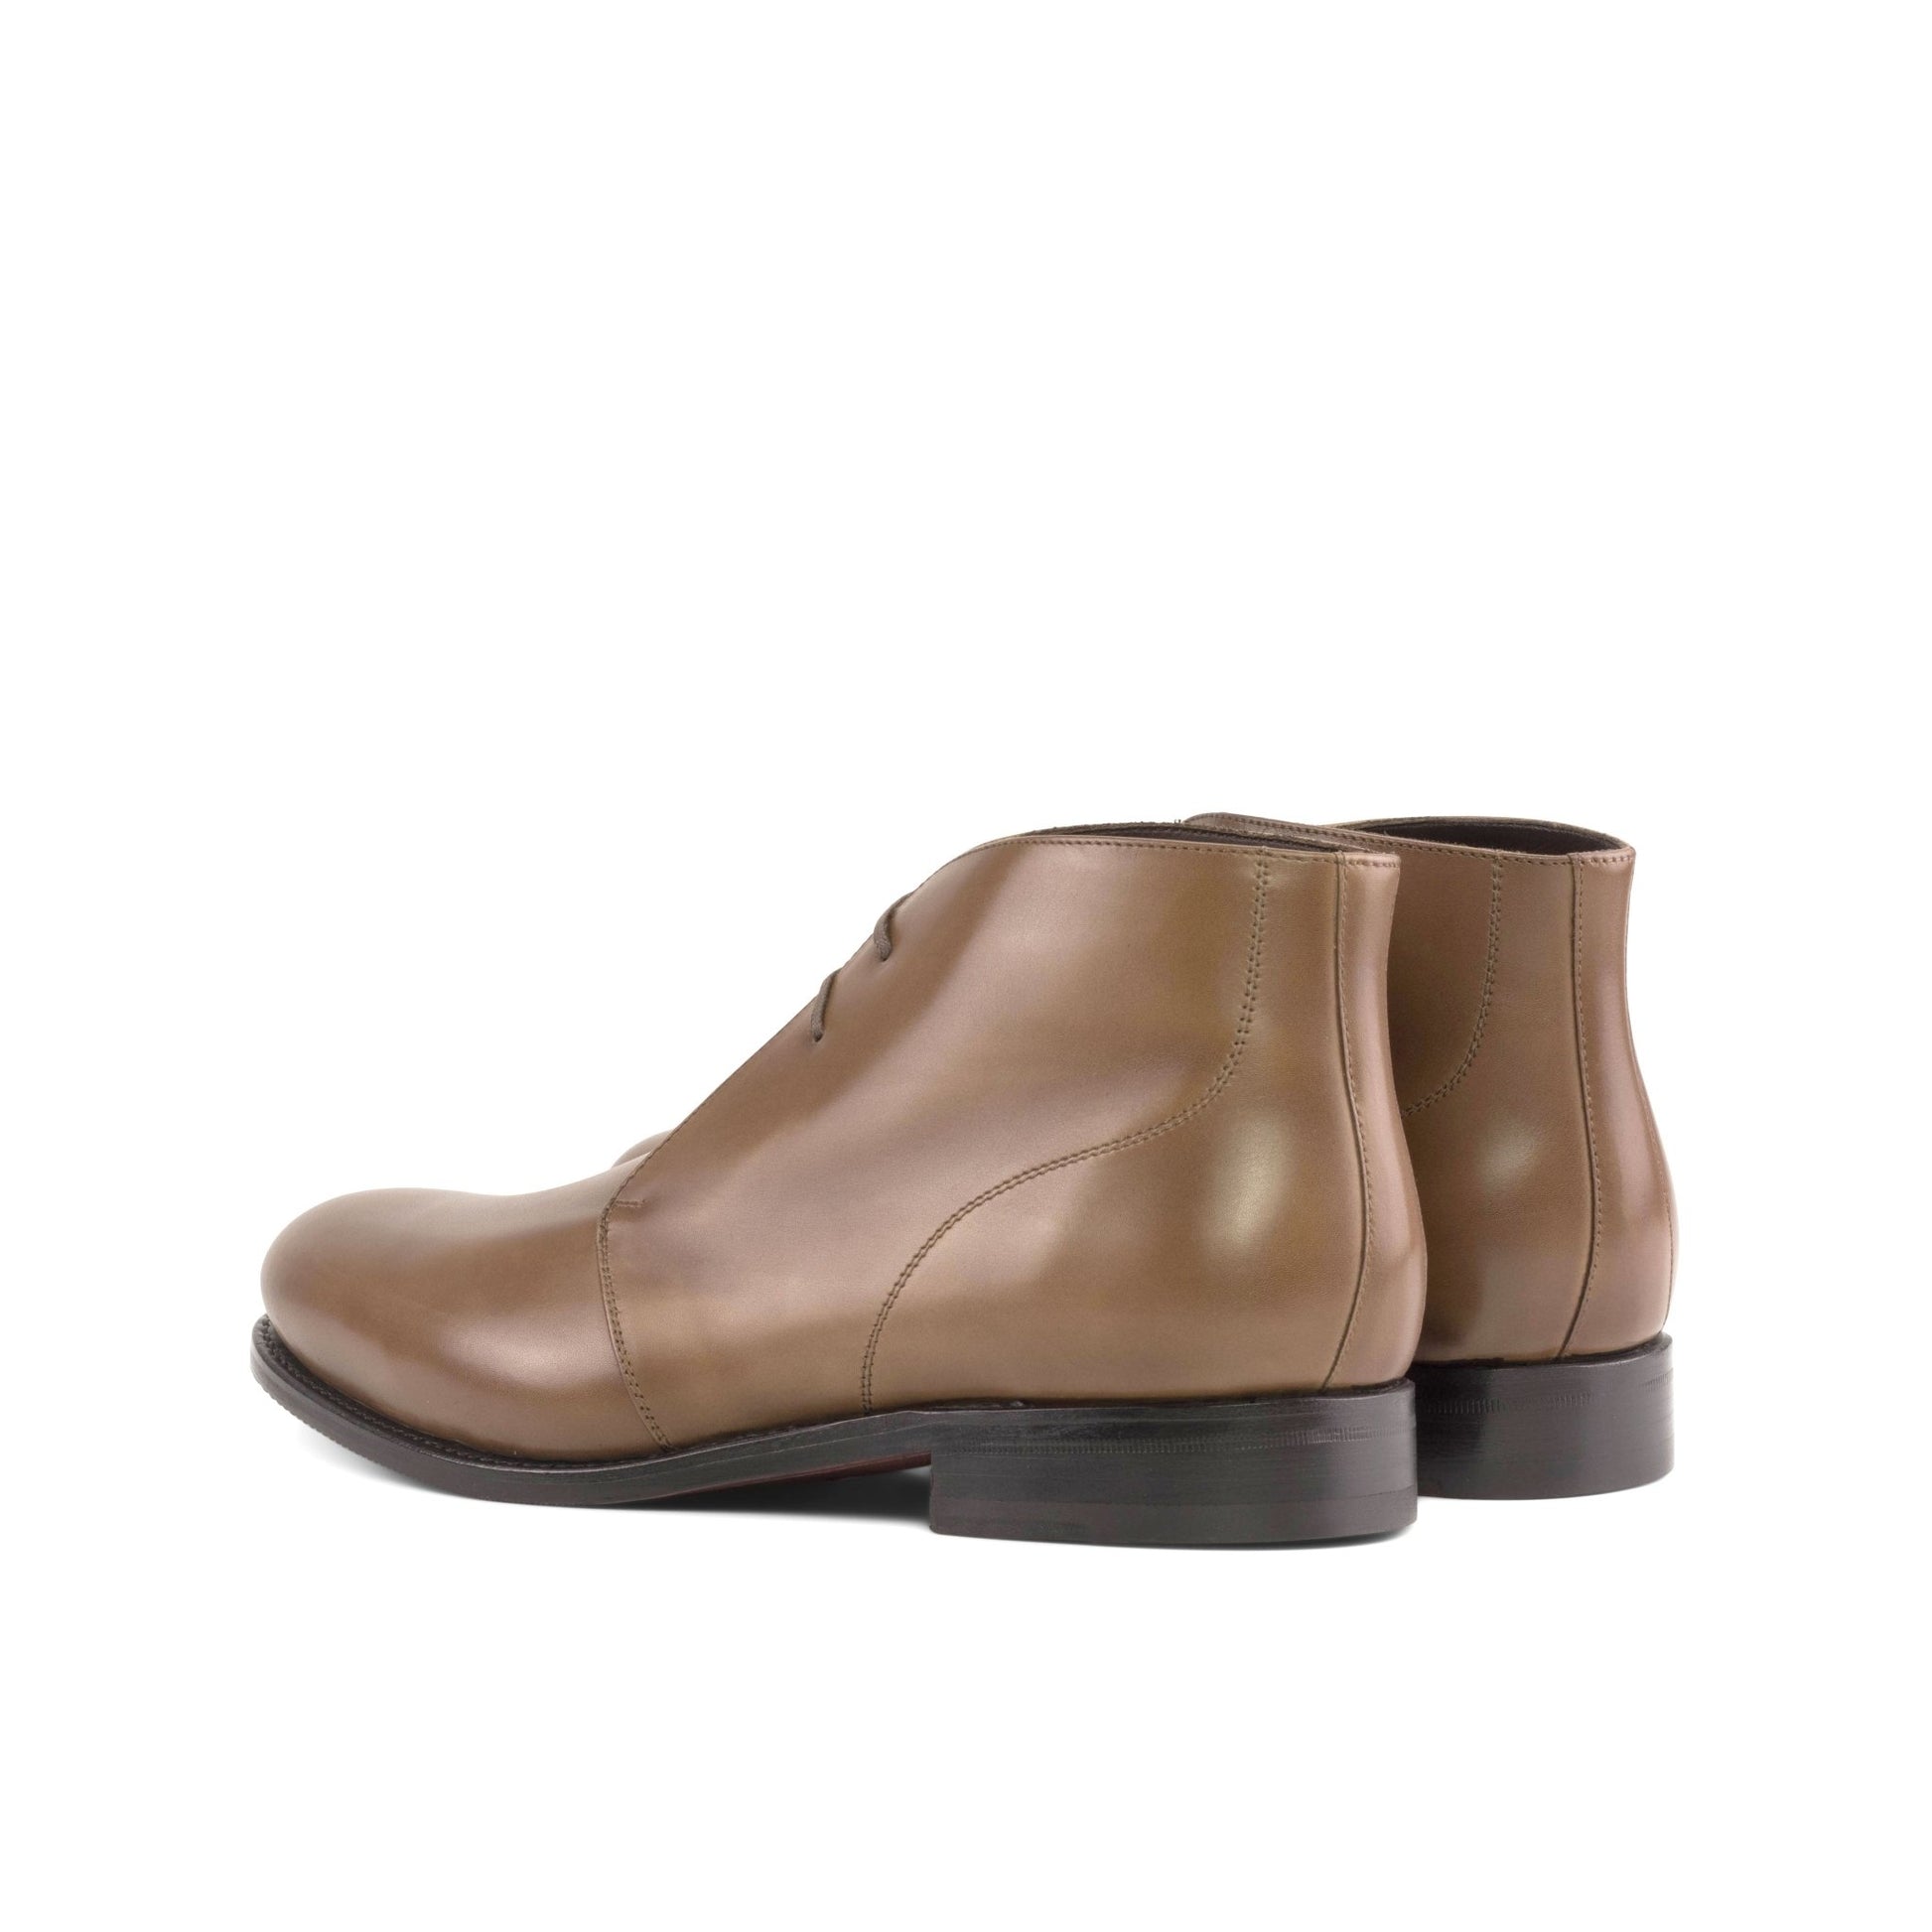 Chukka Boot in Medium Brown Box Calf - Zatorres | Free Shipping on orders over $200